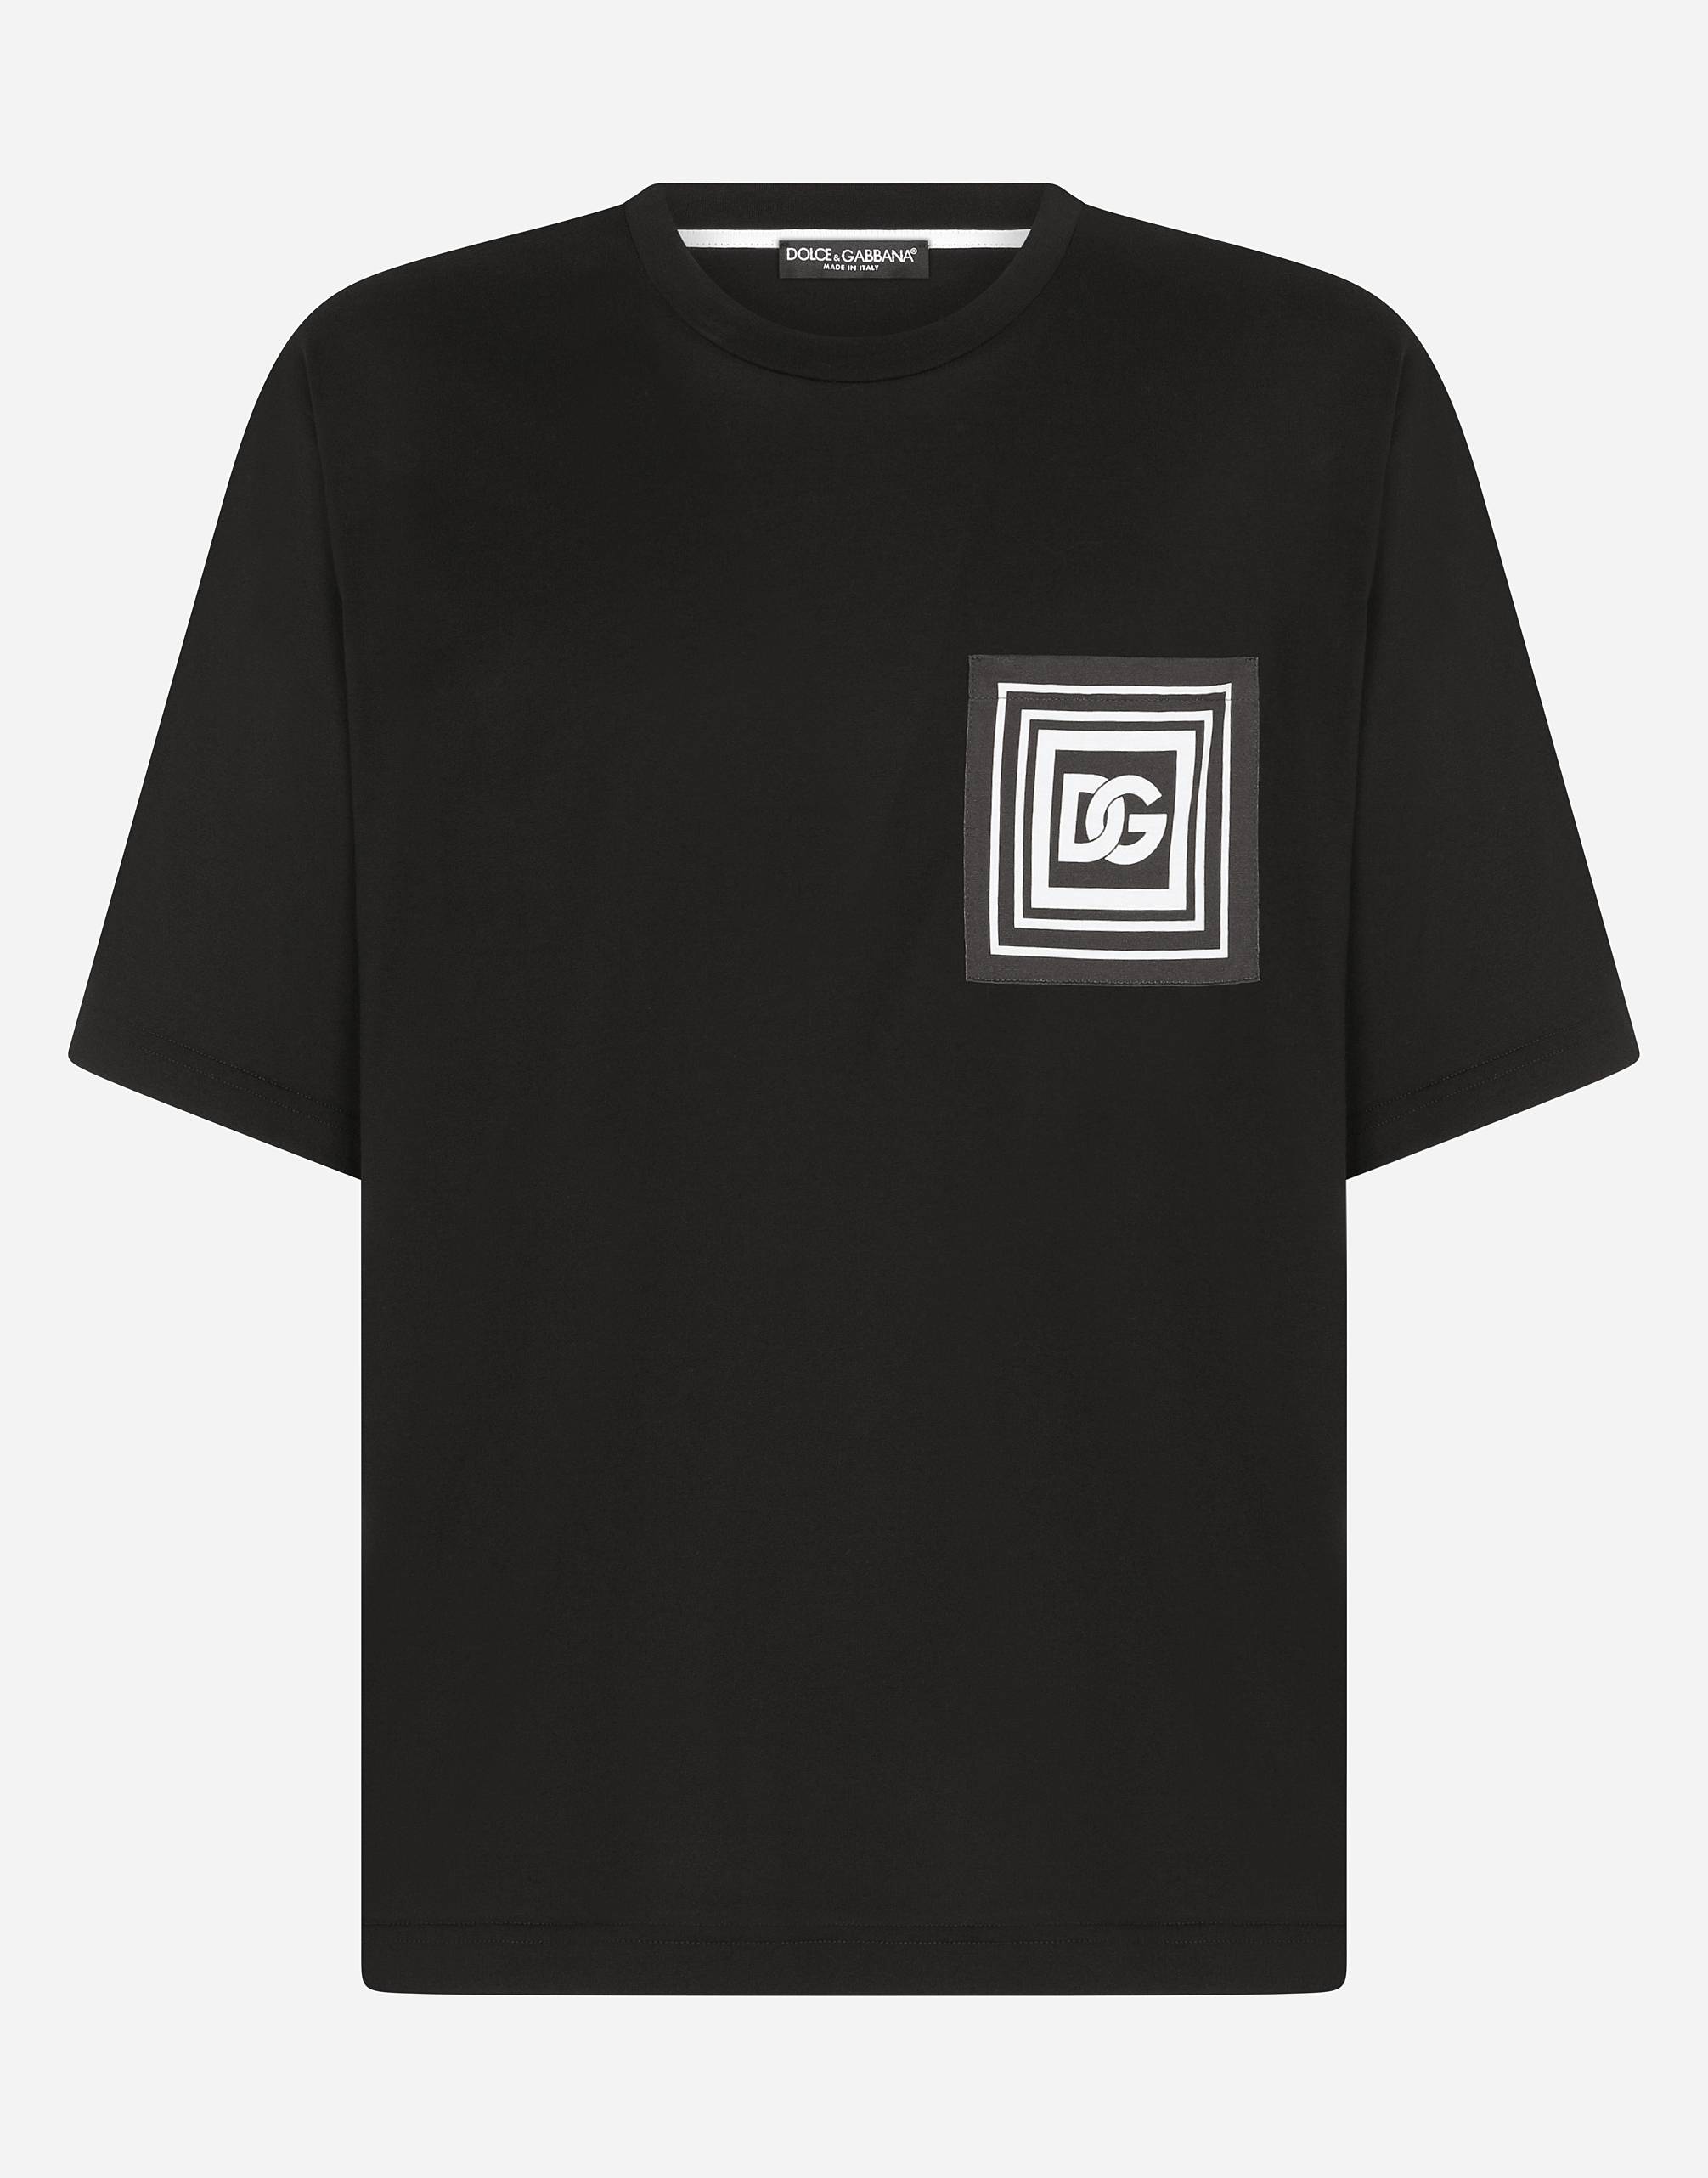 Cotton T-shirt with DG logo print in Multicolor